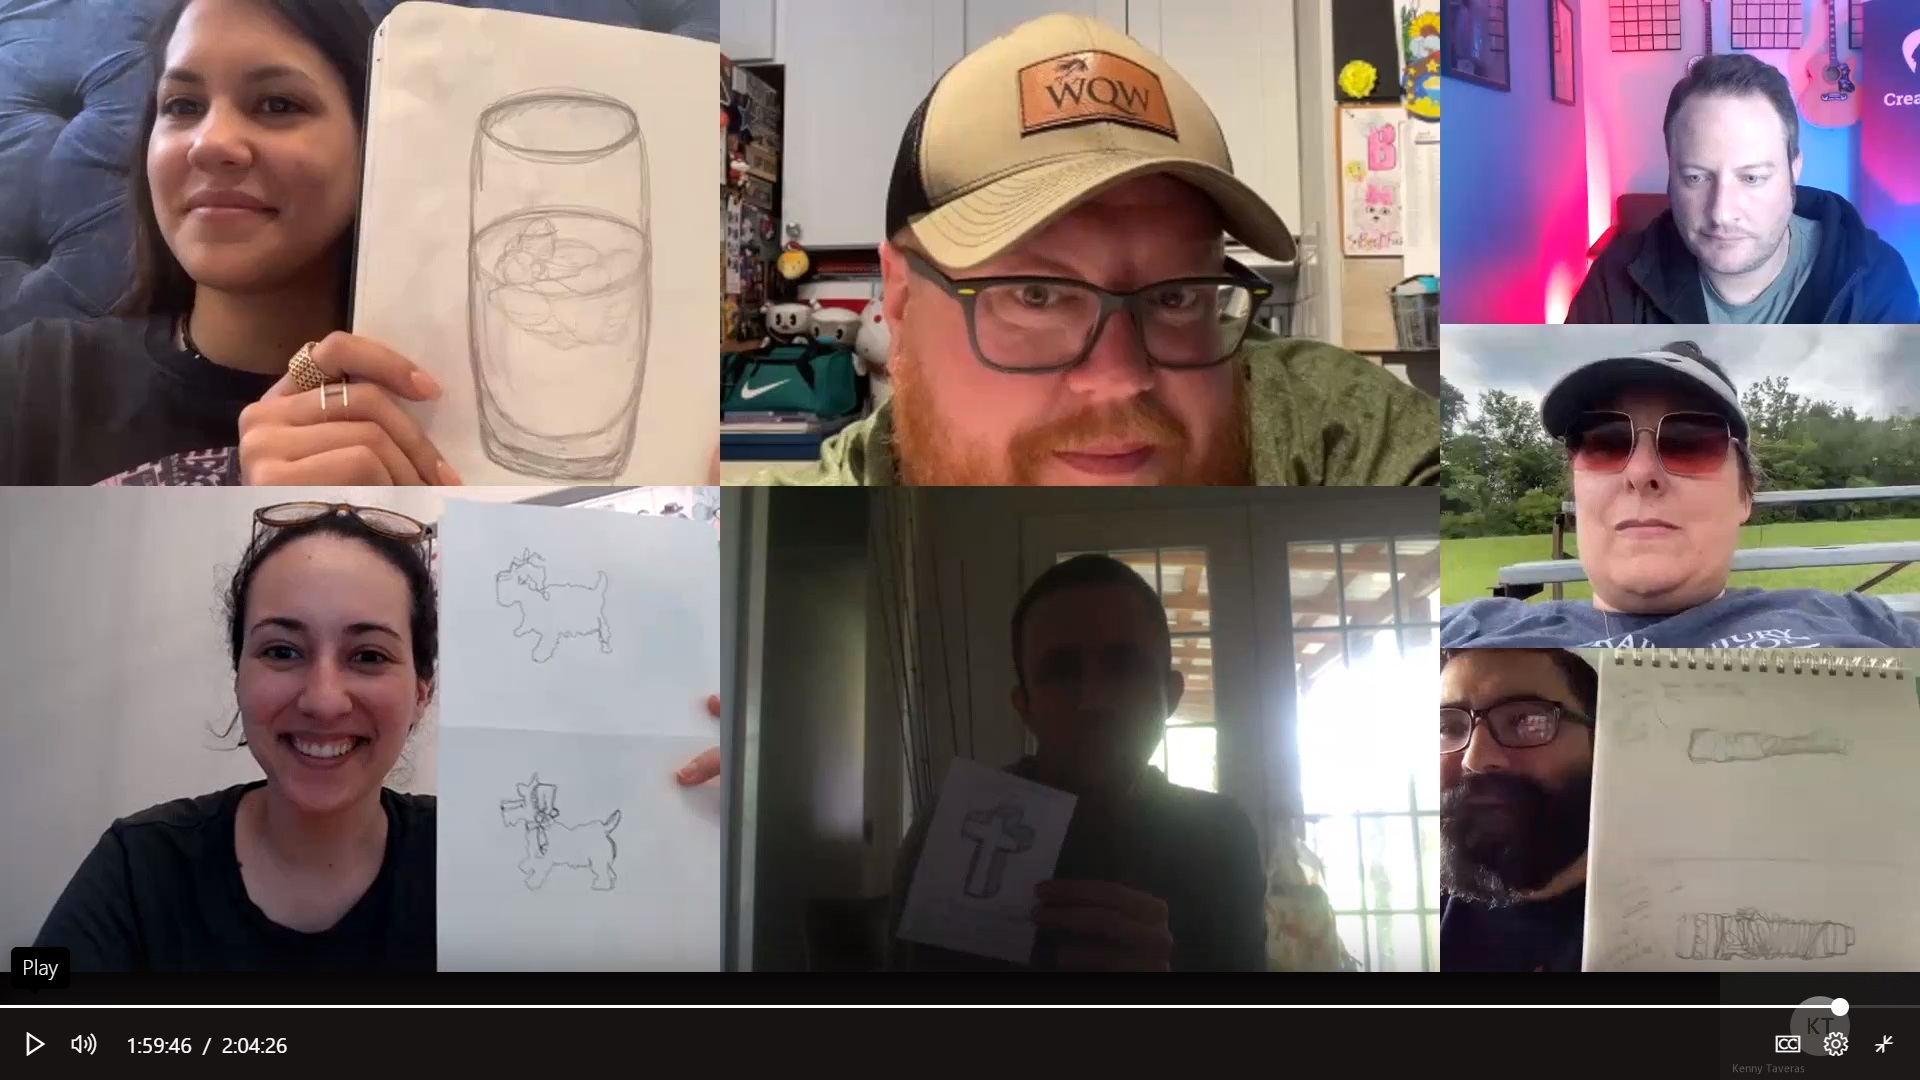 A screenshot of a virtual DMA/Creativets program, featuring a grid of participants and instructors, some of whom are holding sketches made during the class.